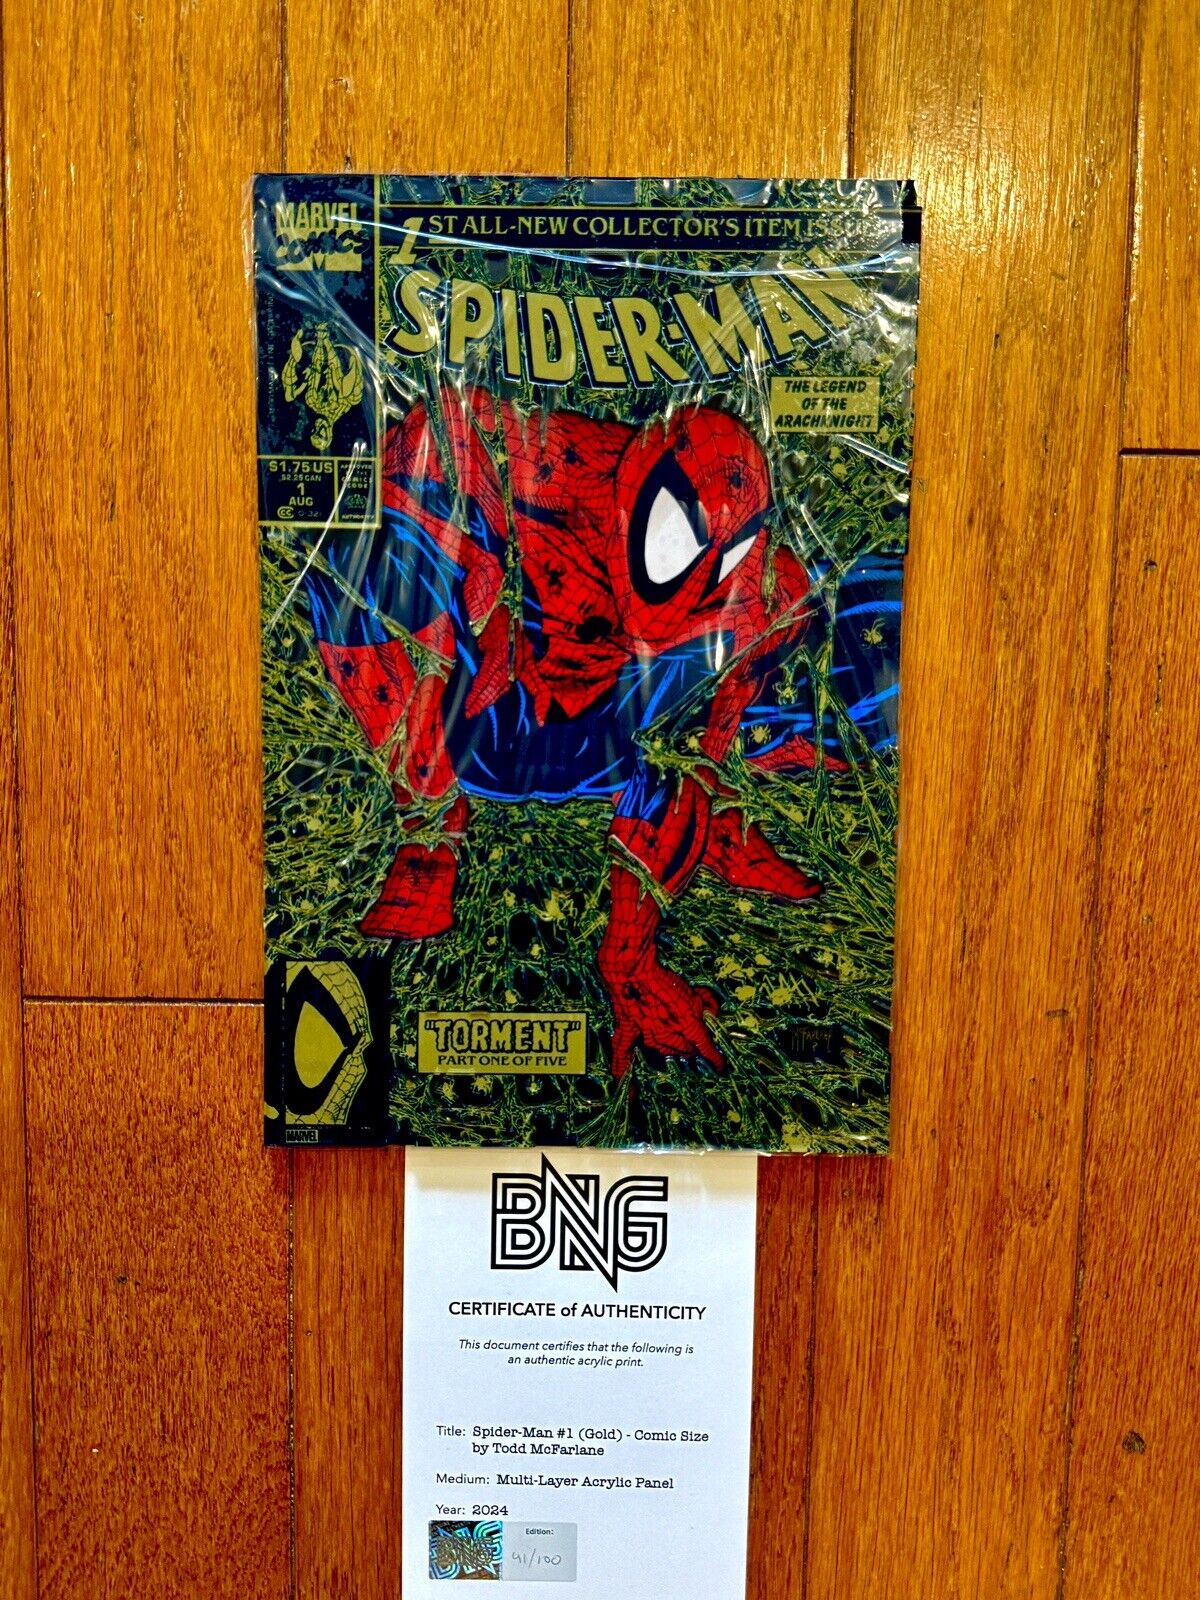 Todd McFarlane Spider-Man #1 Gold Variant Multi-Layer Acrylic Comic LE BNG /100